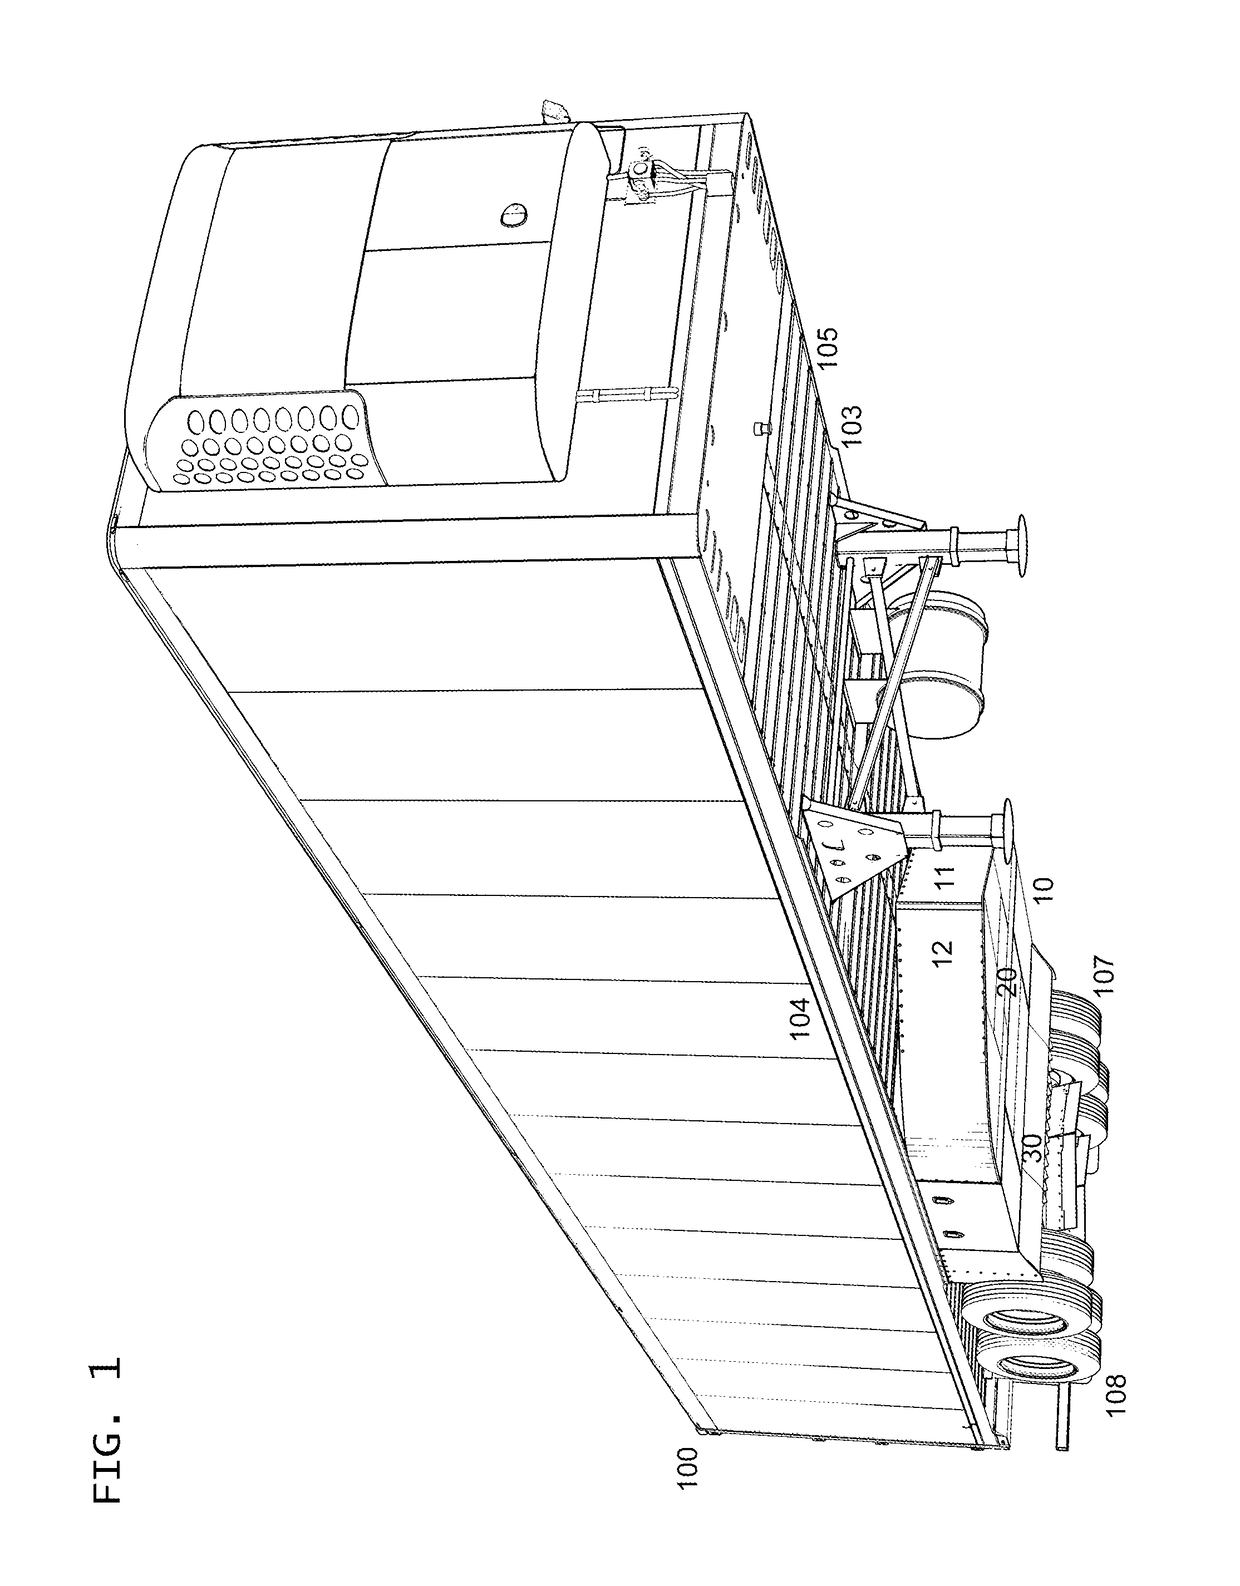 Vehicle Fairing with Brake Cooling System